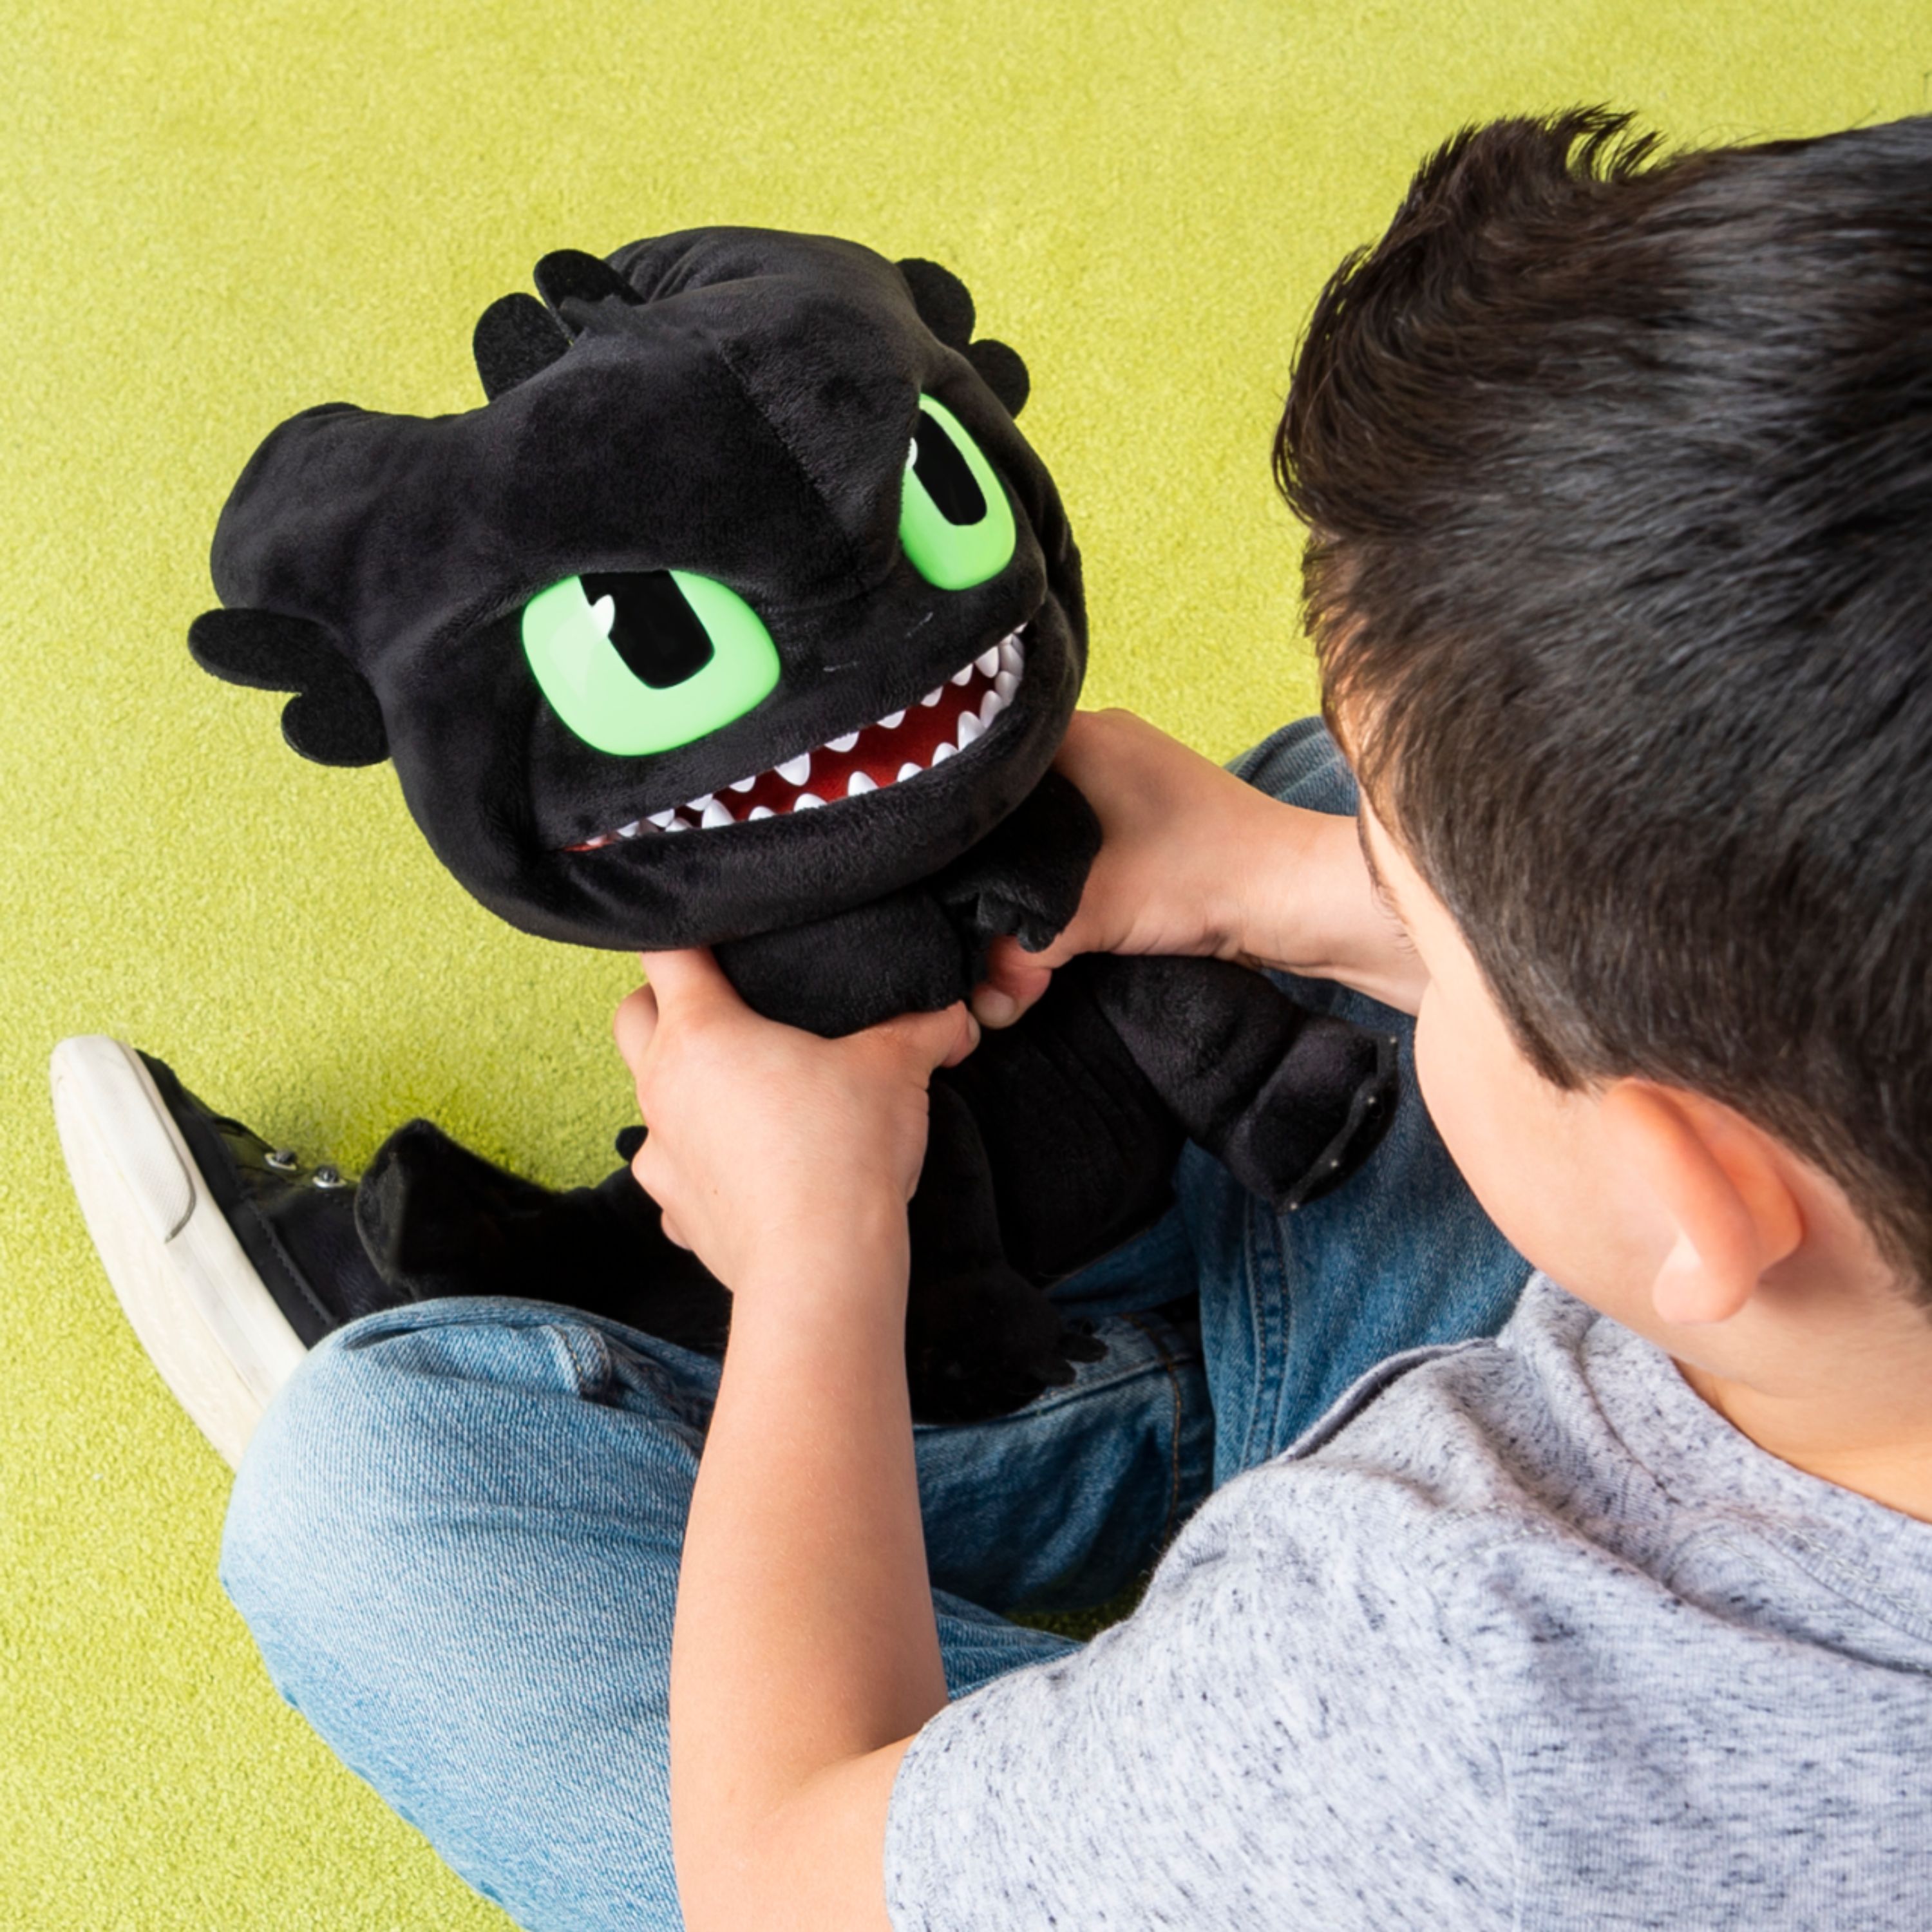 Best Buy: DreamWorks Dragons Toothless Plush Toy 6052479